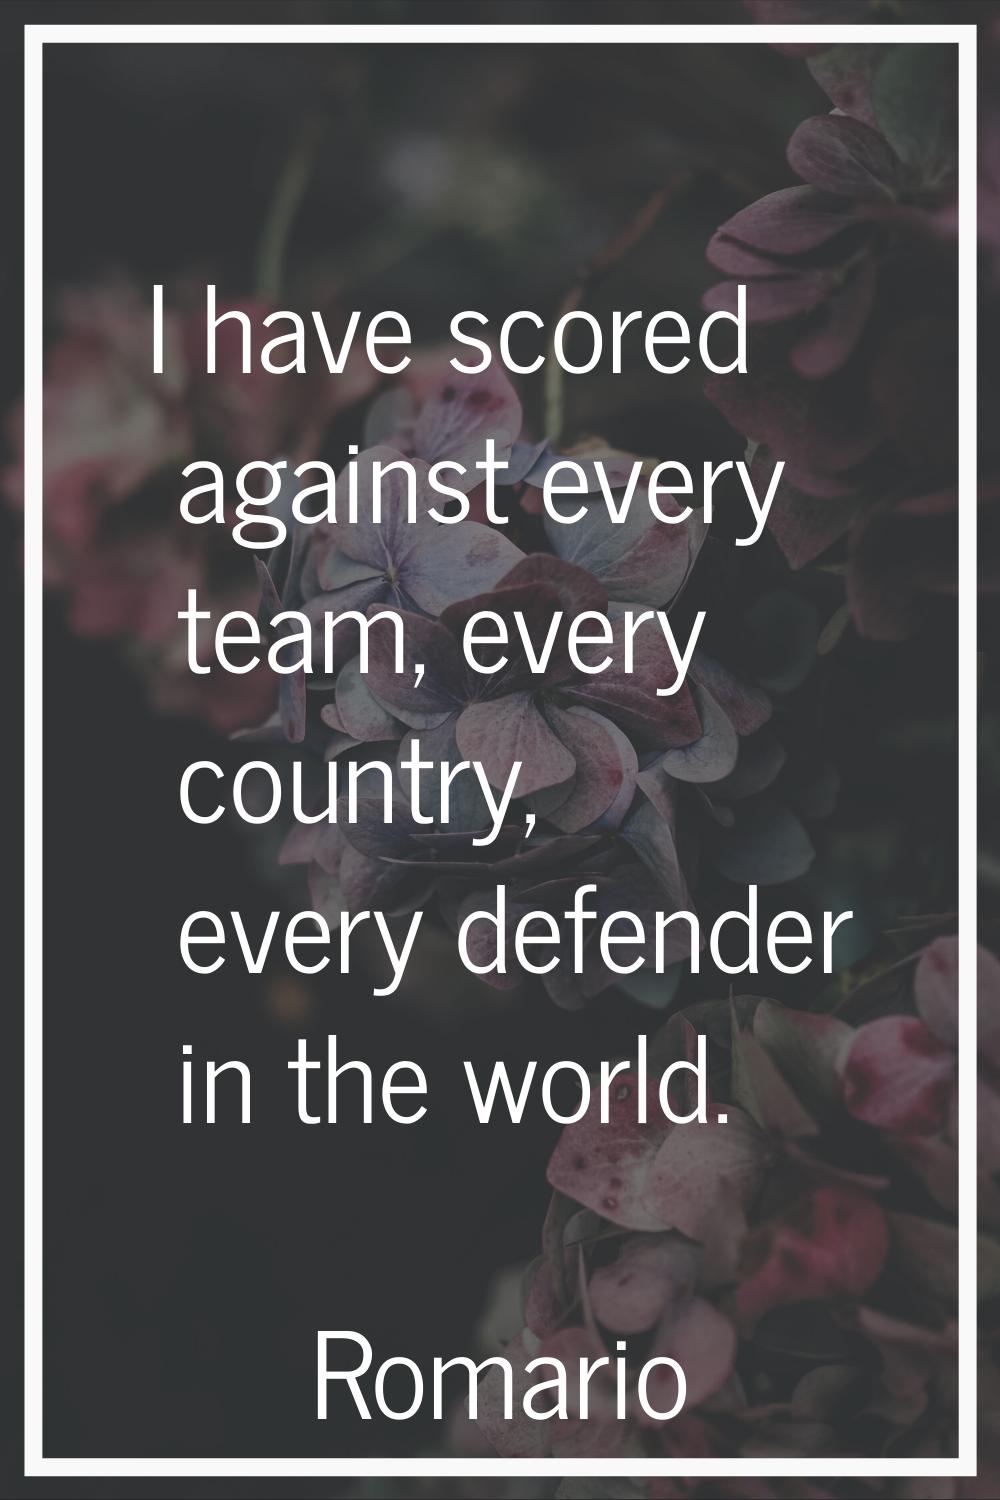 I have scored against every team, every country, every defender in the world.